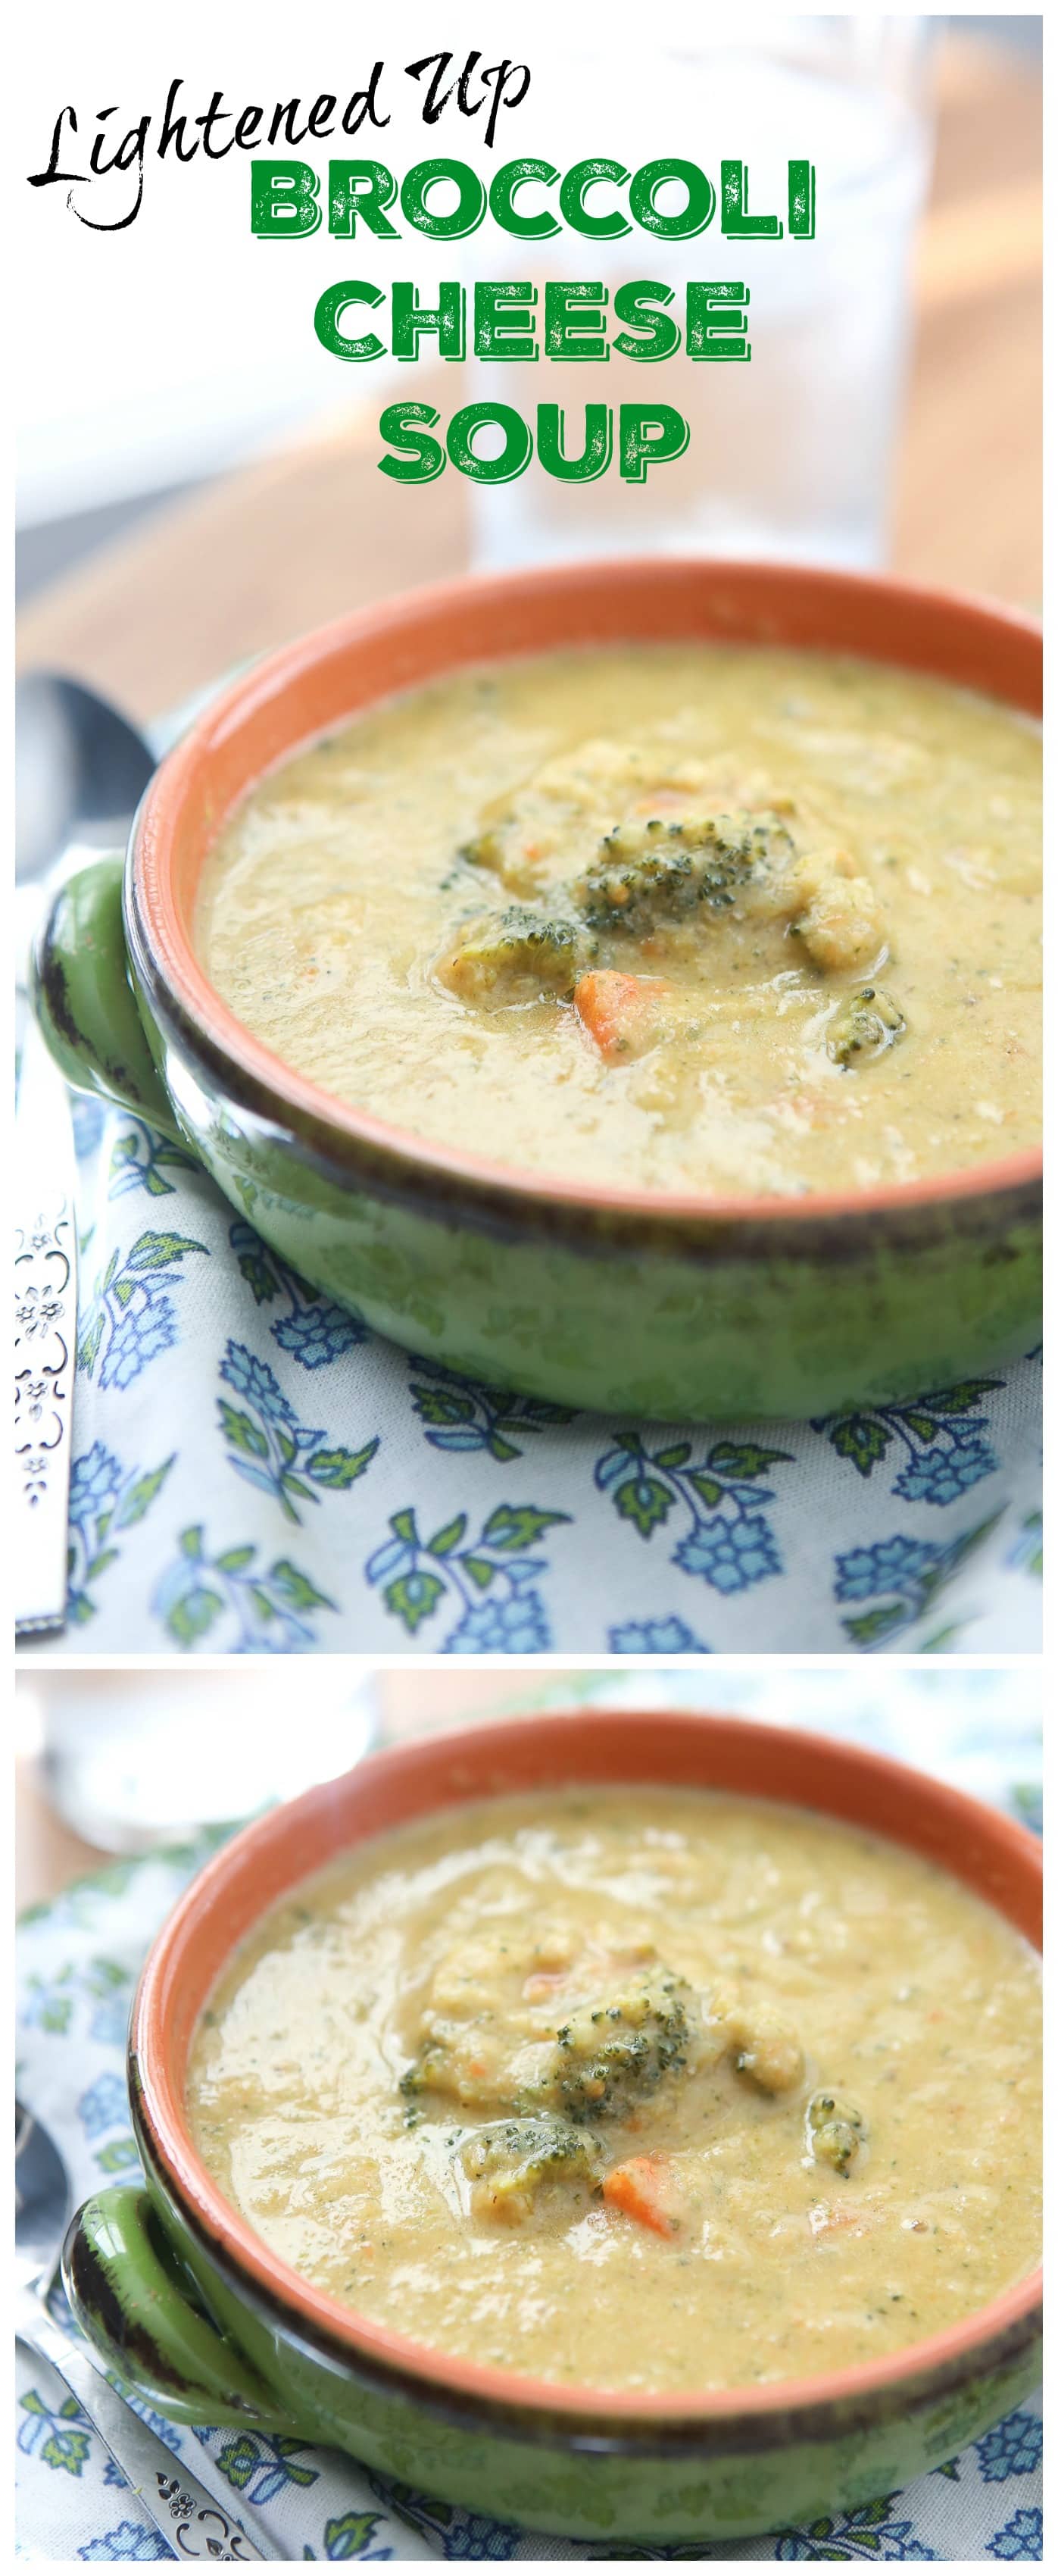 Lightened Up Broccoli Cheese Soup - Aggie's Kitchen